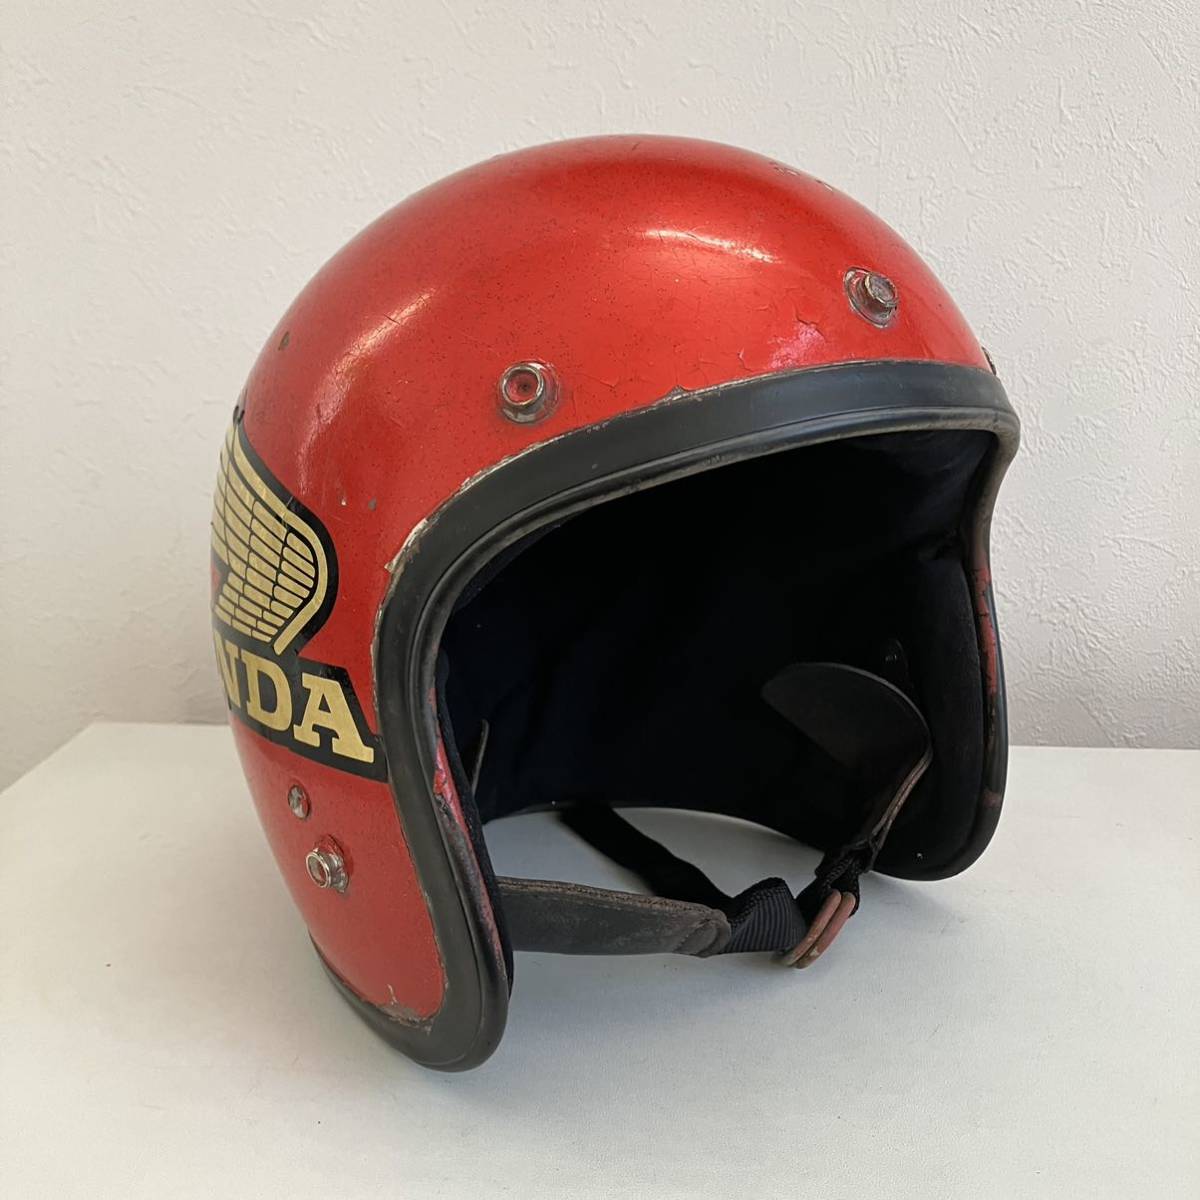  vintage helmet *1960 period HONDA rare XL size jet that time thing american gold red flakes lame CB CBX XJR GS Bab Z old car foa